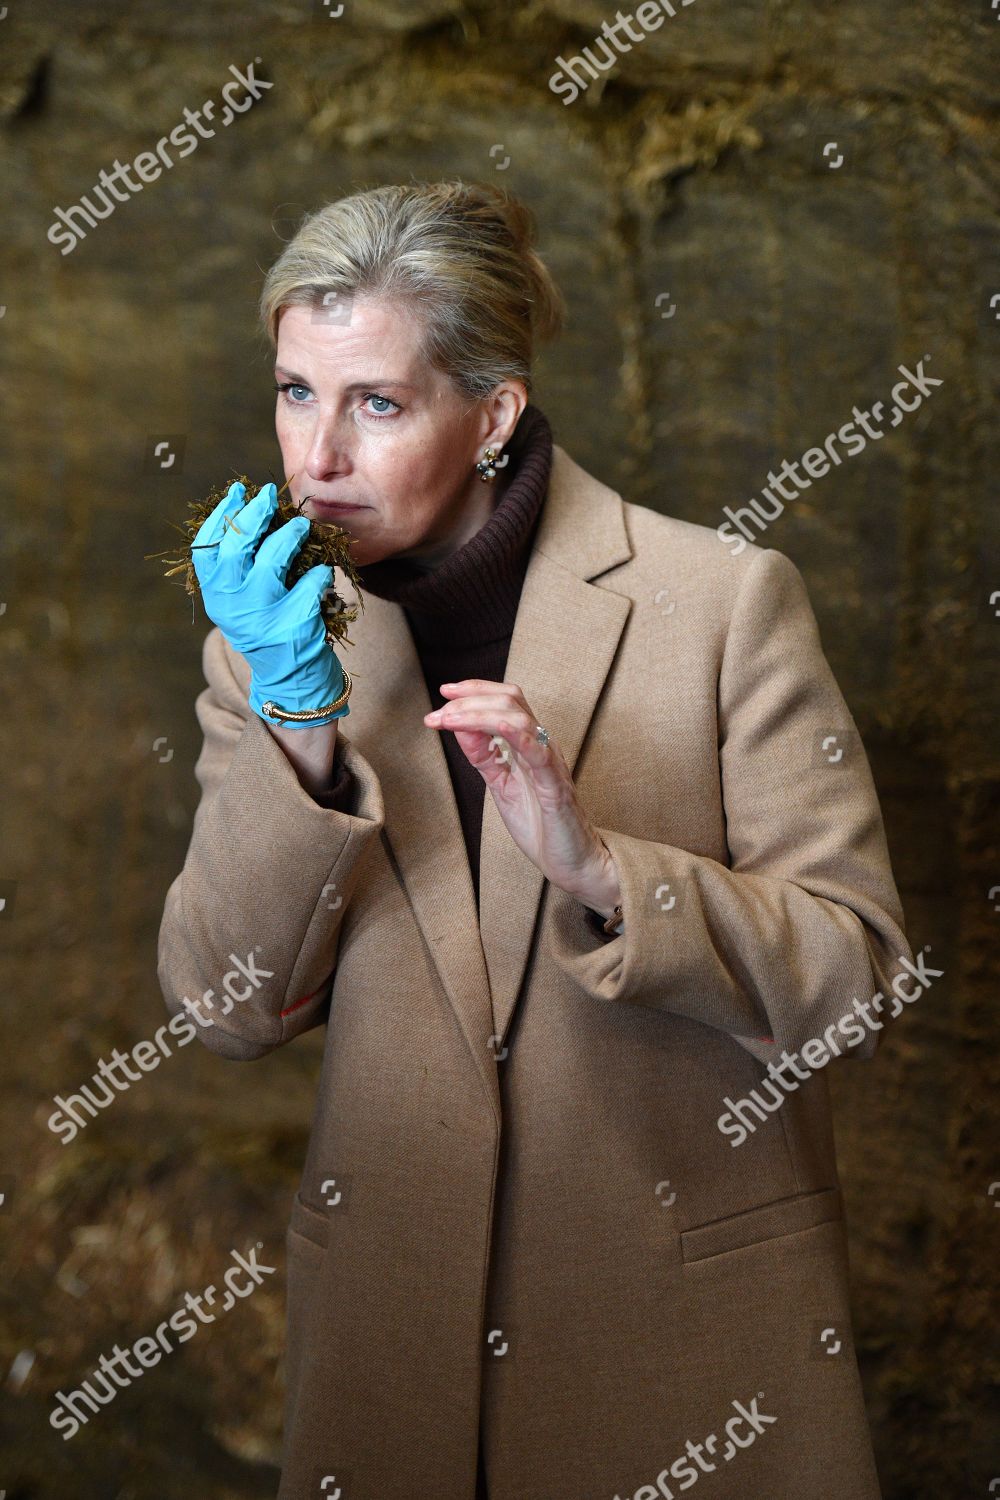 sophie-countess-of-wessex-visit-to-cumbria-shutterstock-editorial-10095439cp.jpg